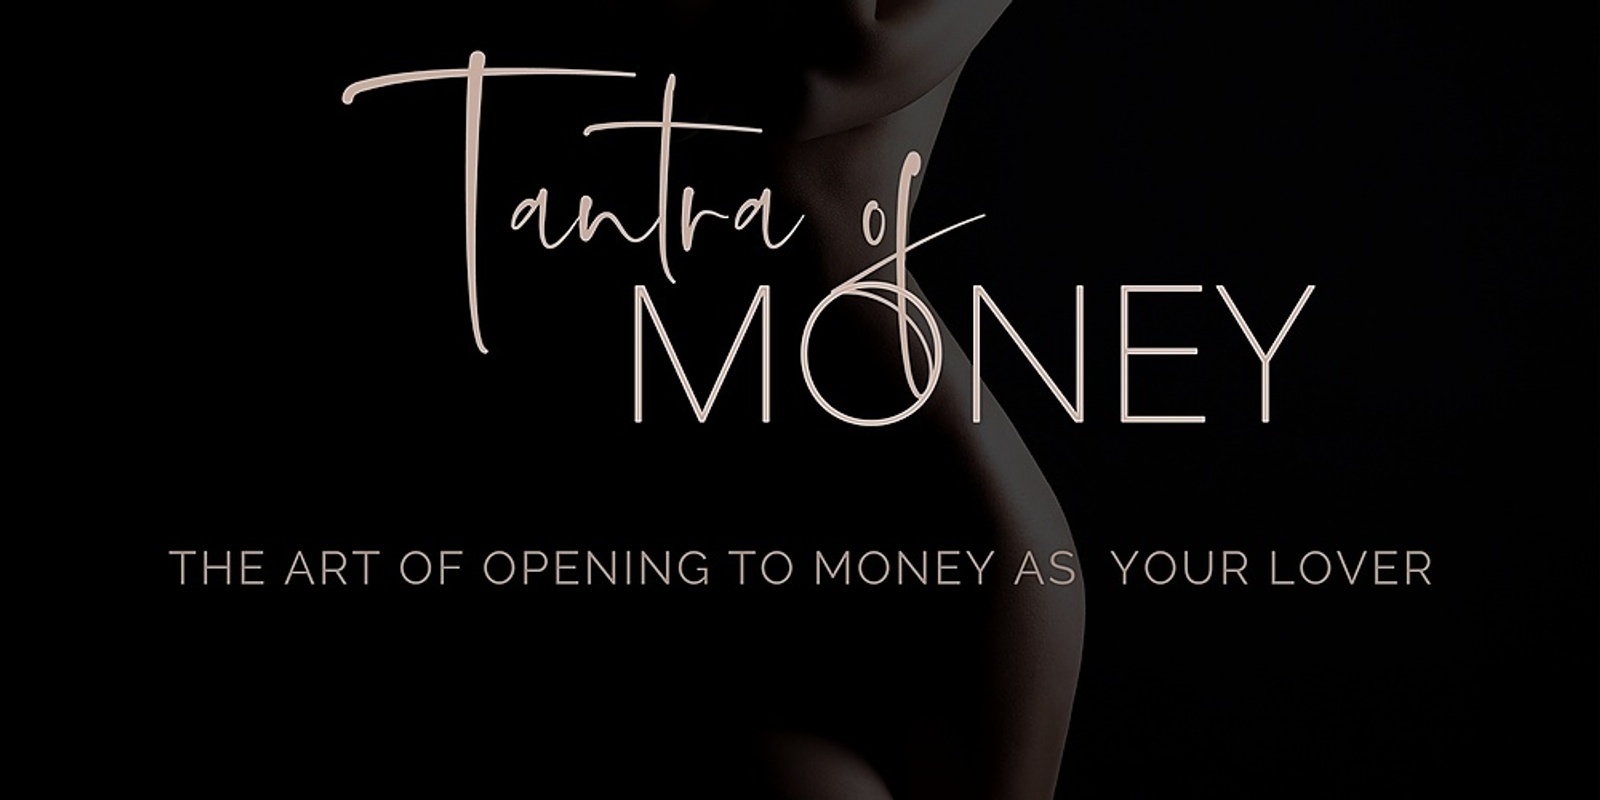 Tantra of Money - The Art of opening to money as a lover ONLINE WORKSHOP